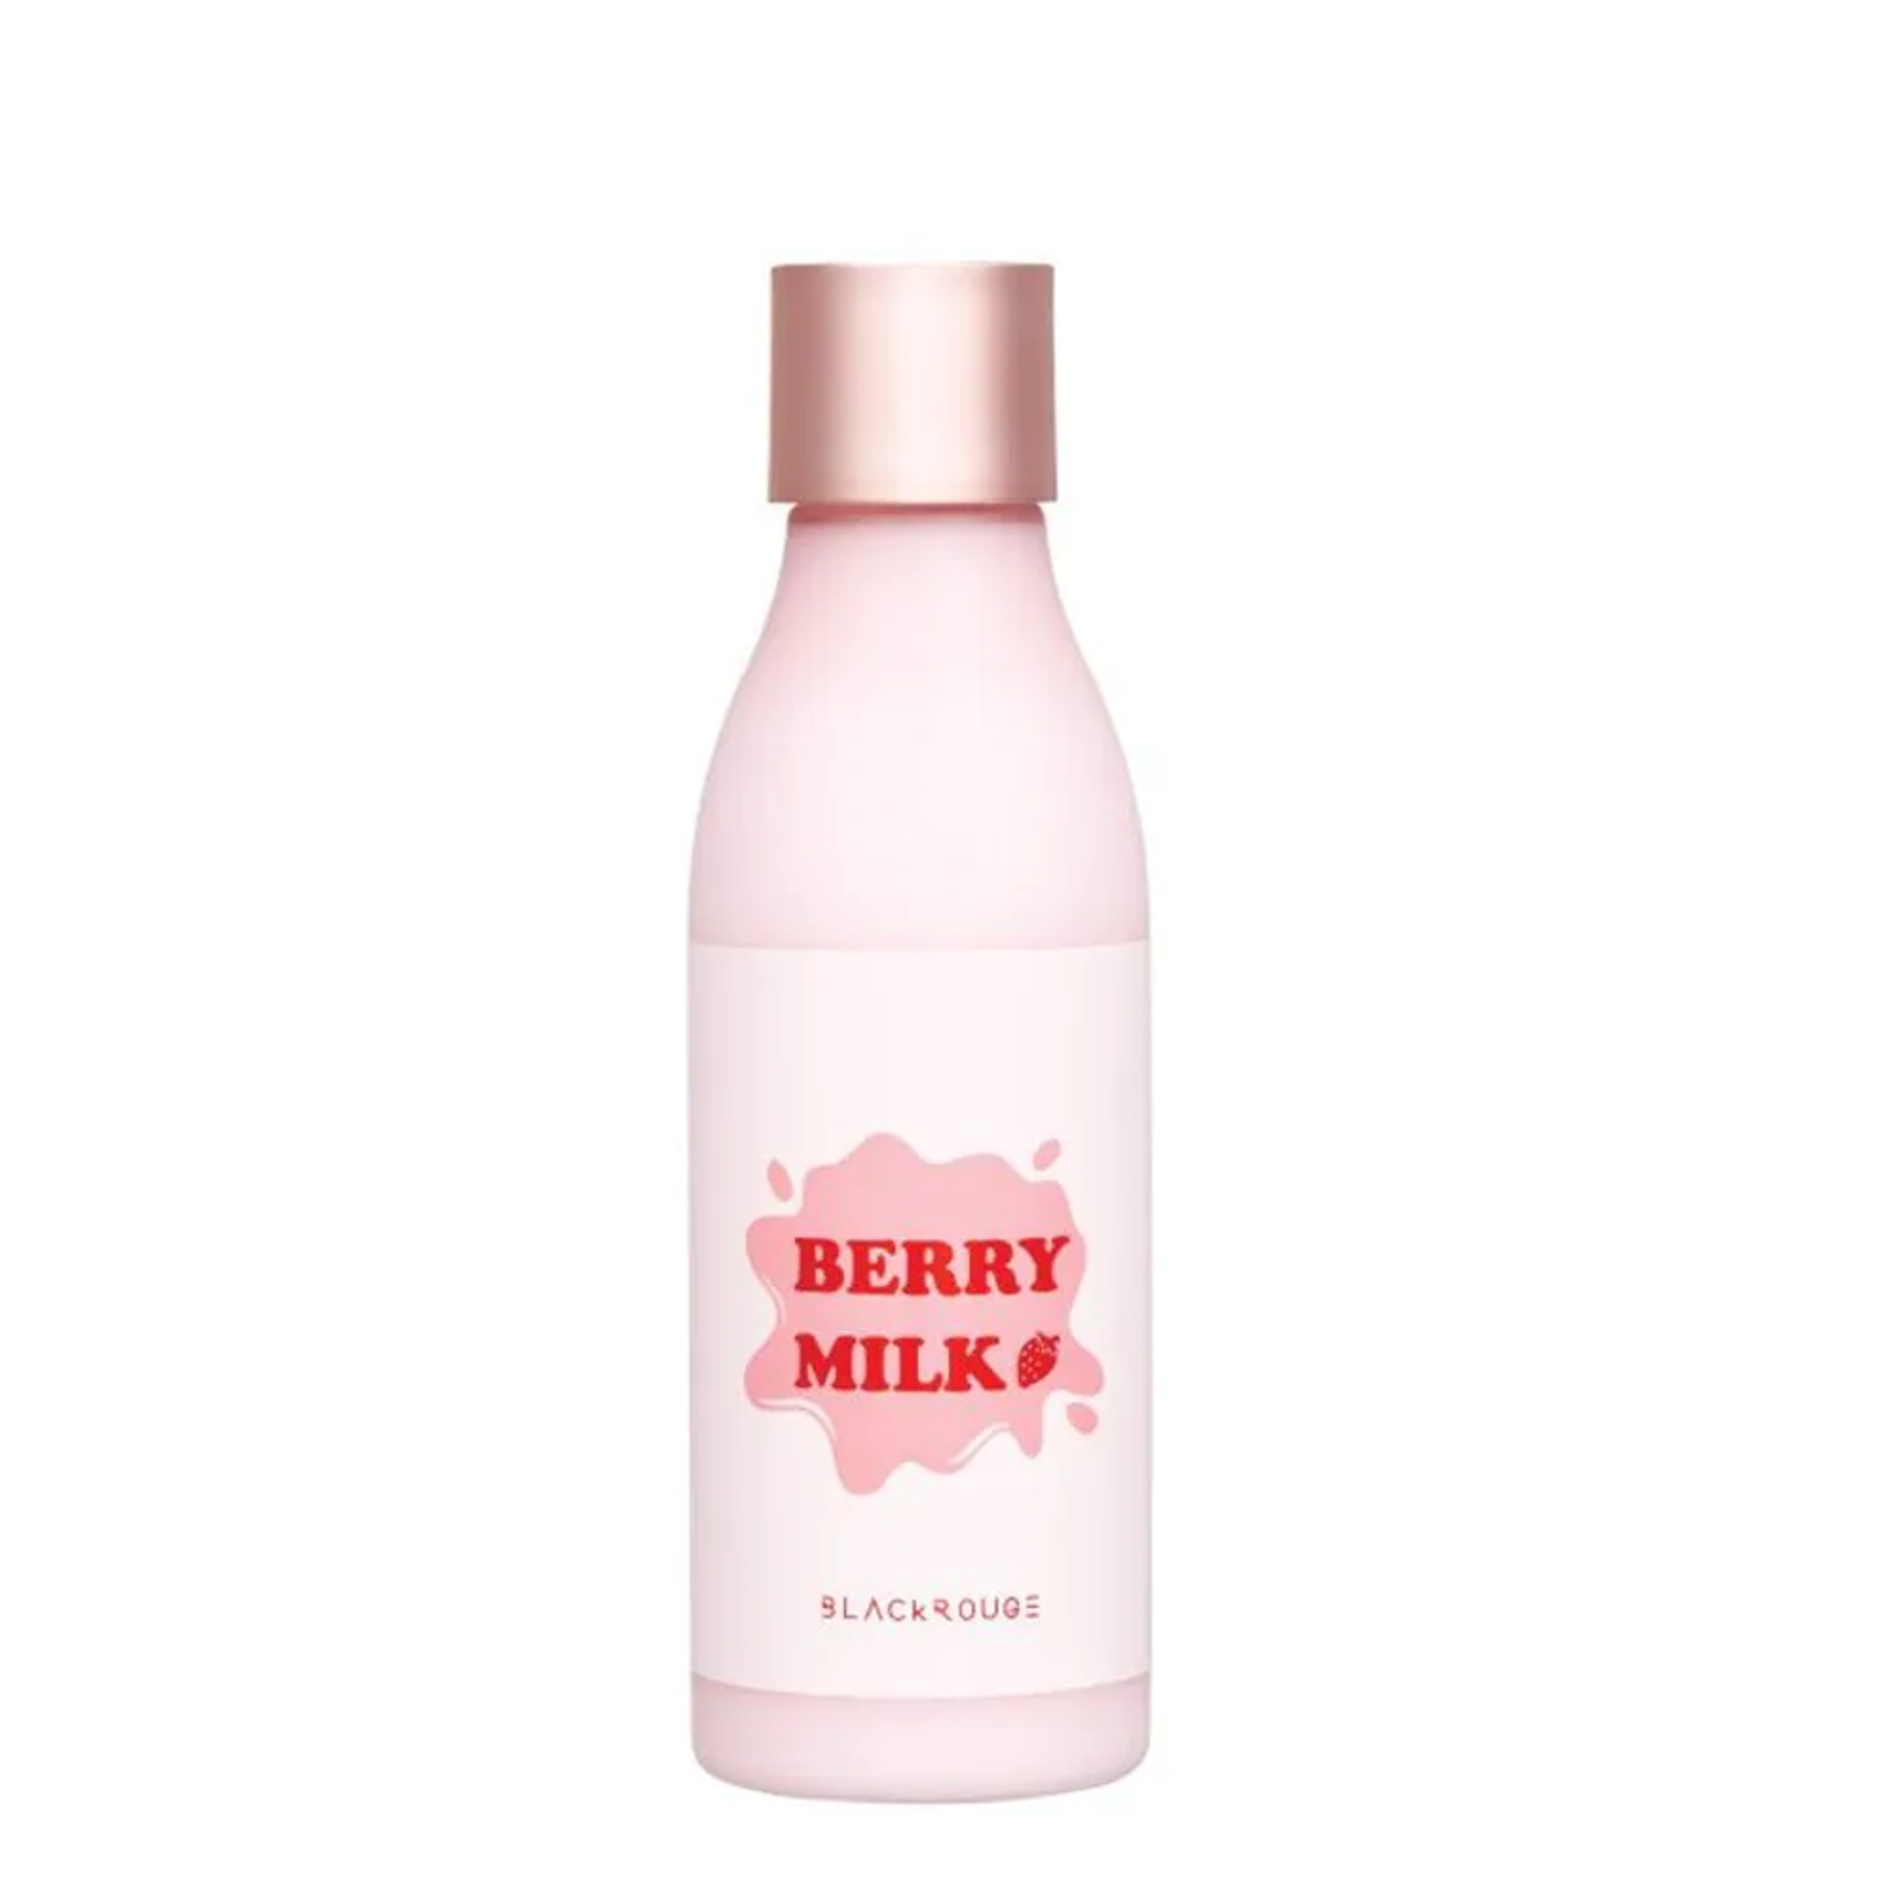 nuoc-can-bang-duong-am-black-rouge-real-strawberry-milk-toner-200ml-5